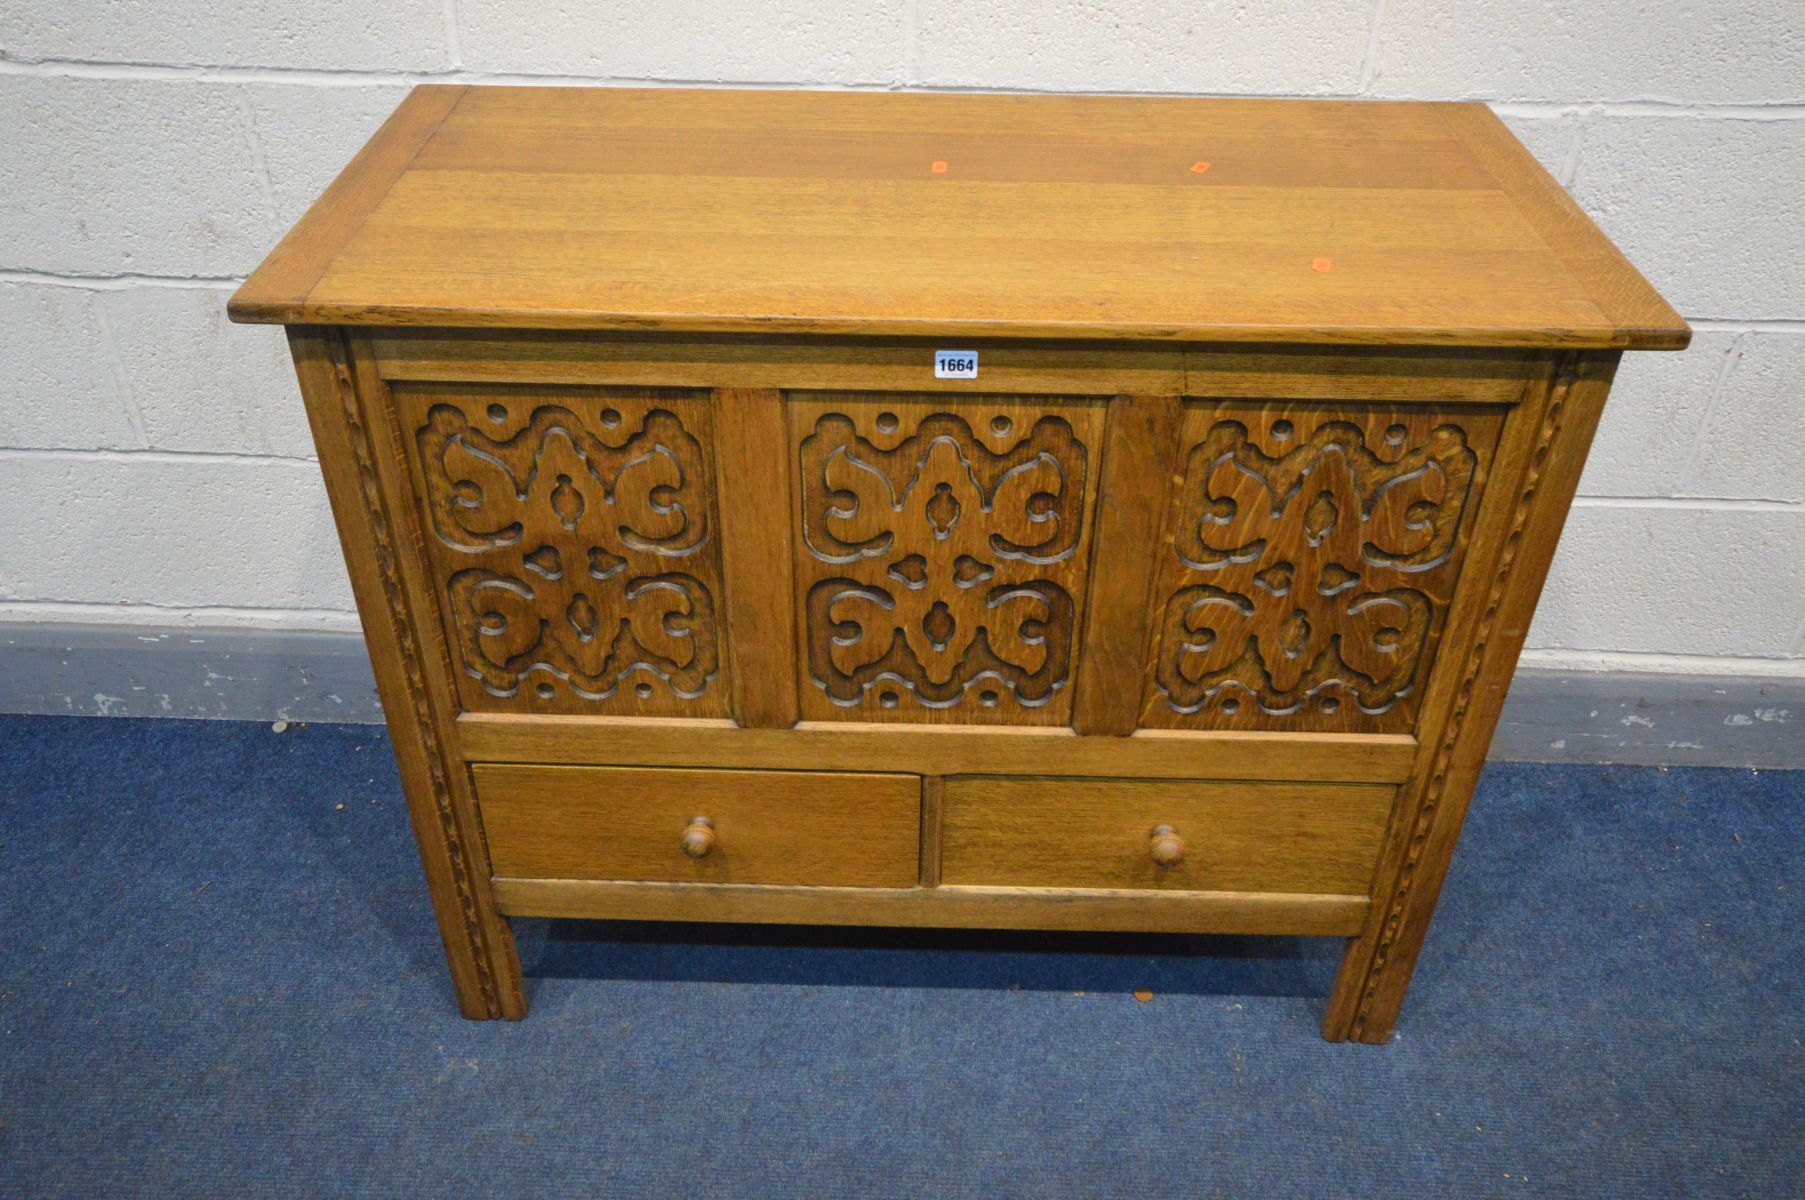 A 'HEATHLAND FURNITURE' OAK MULE CHEST, with blind fretwork detailing to the three front panels